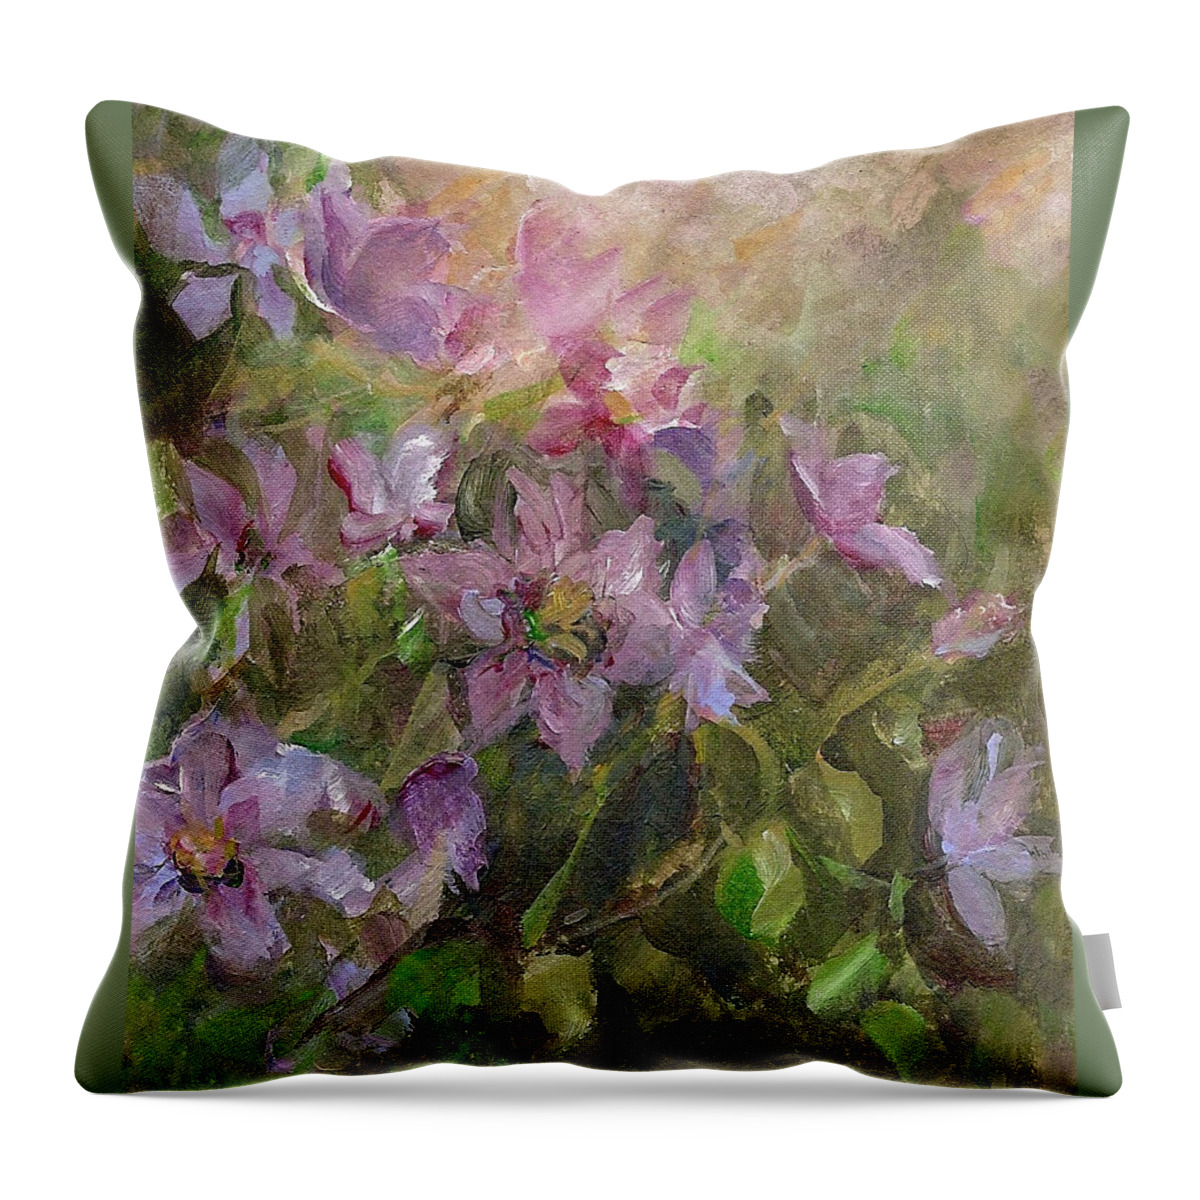 Floral Throw Pillow featuring the painting Garden Poetry by Mary Wolf